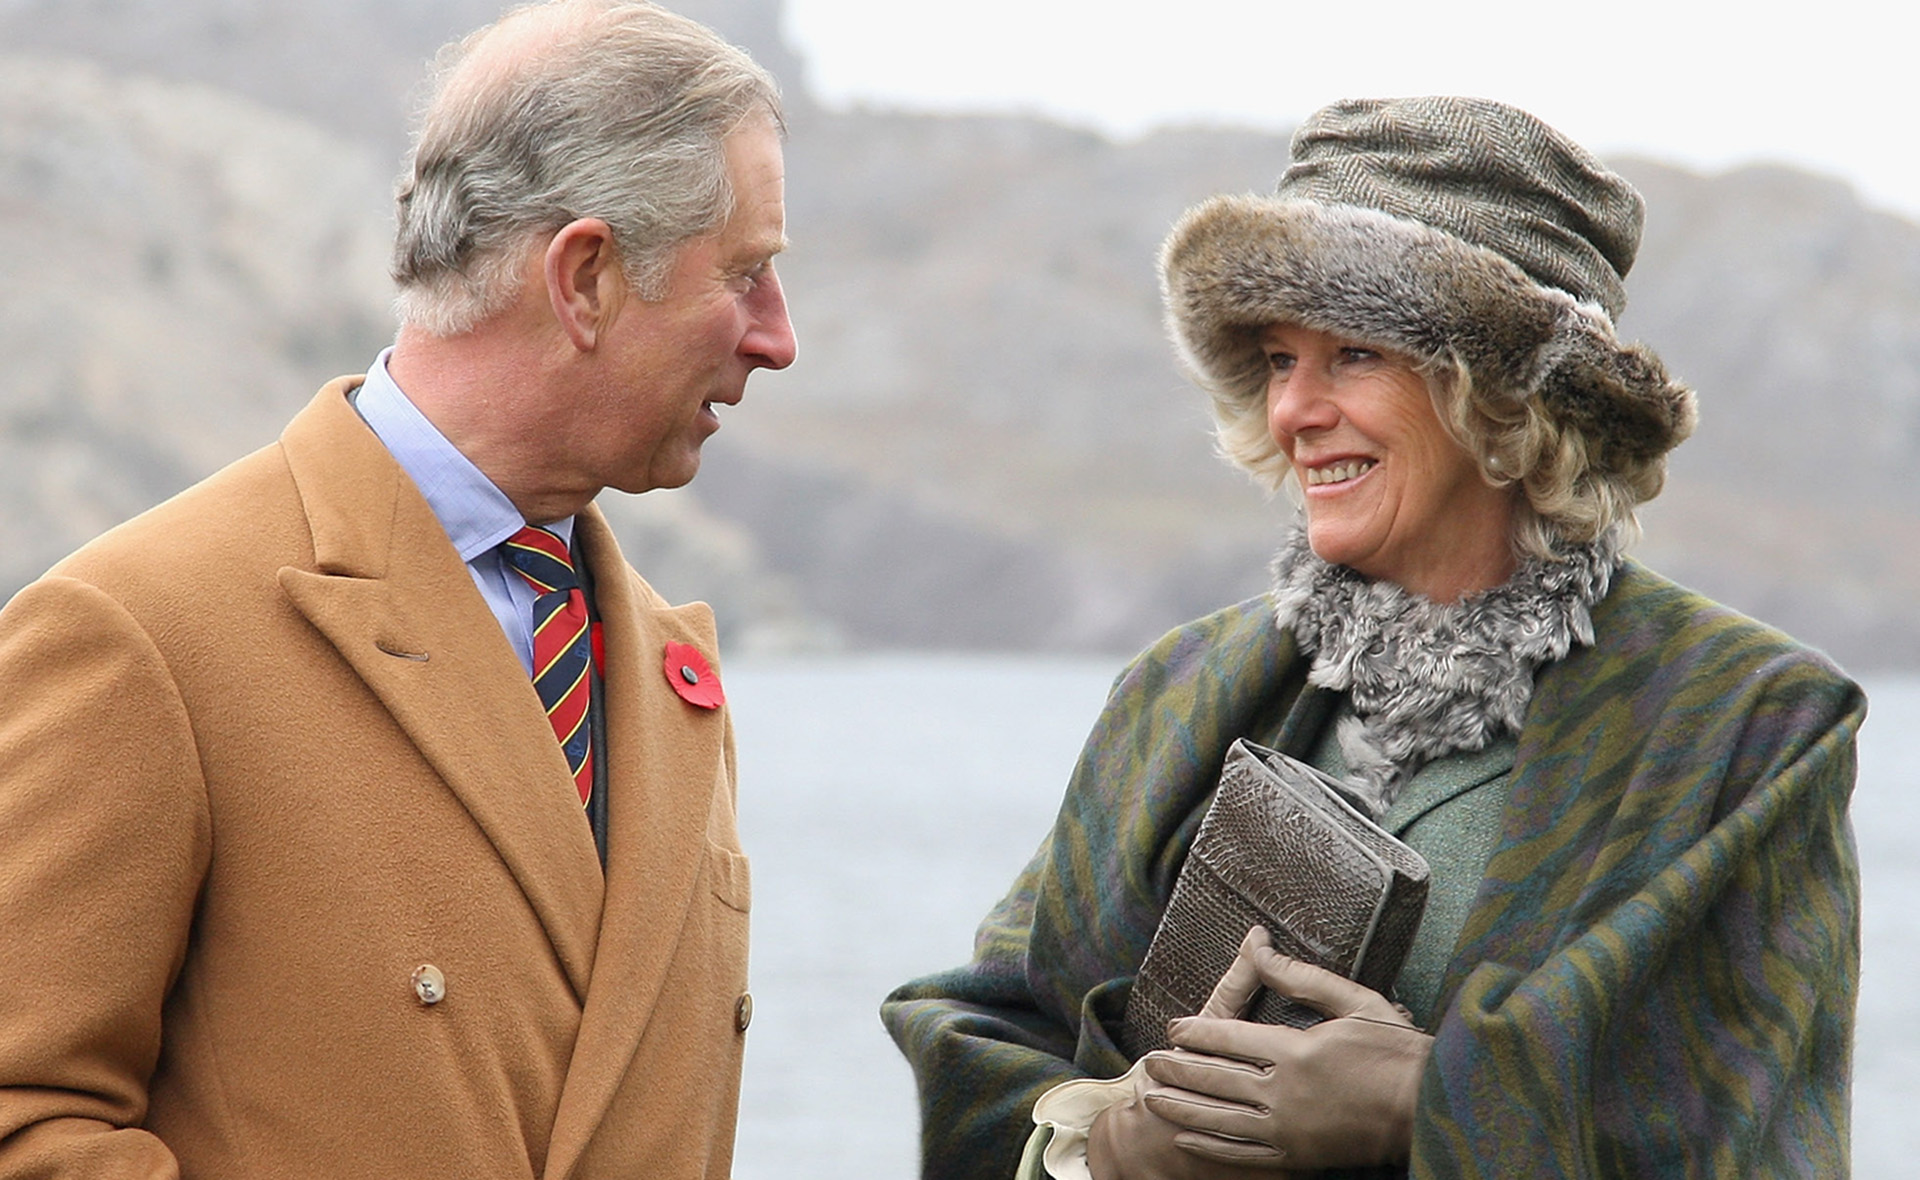 Prince Charles and Camilla, Duchess of Cornwall, announce exciting royal tour in honour of the Queen’s Platinum Jubilee